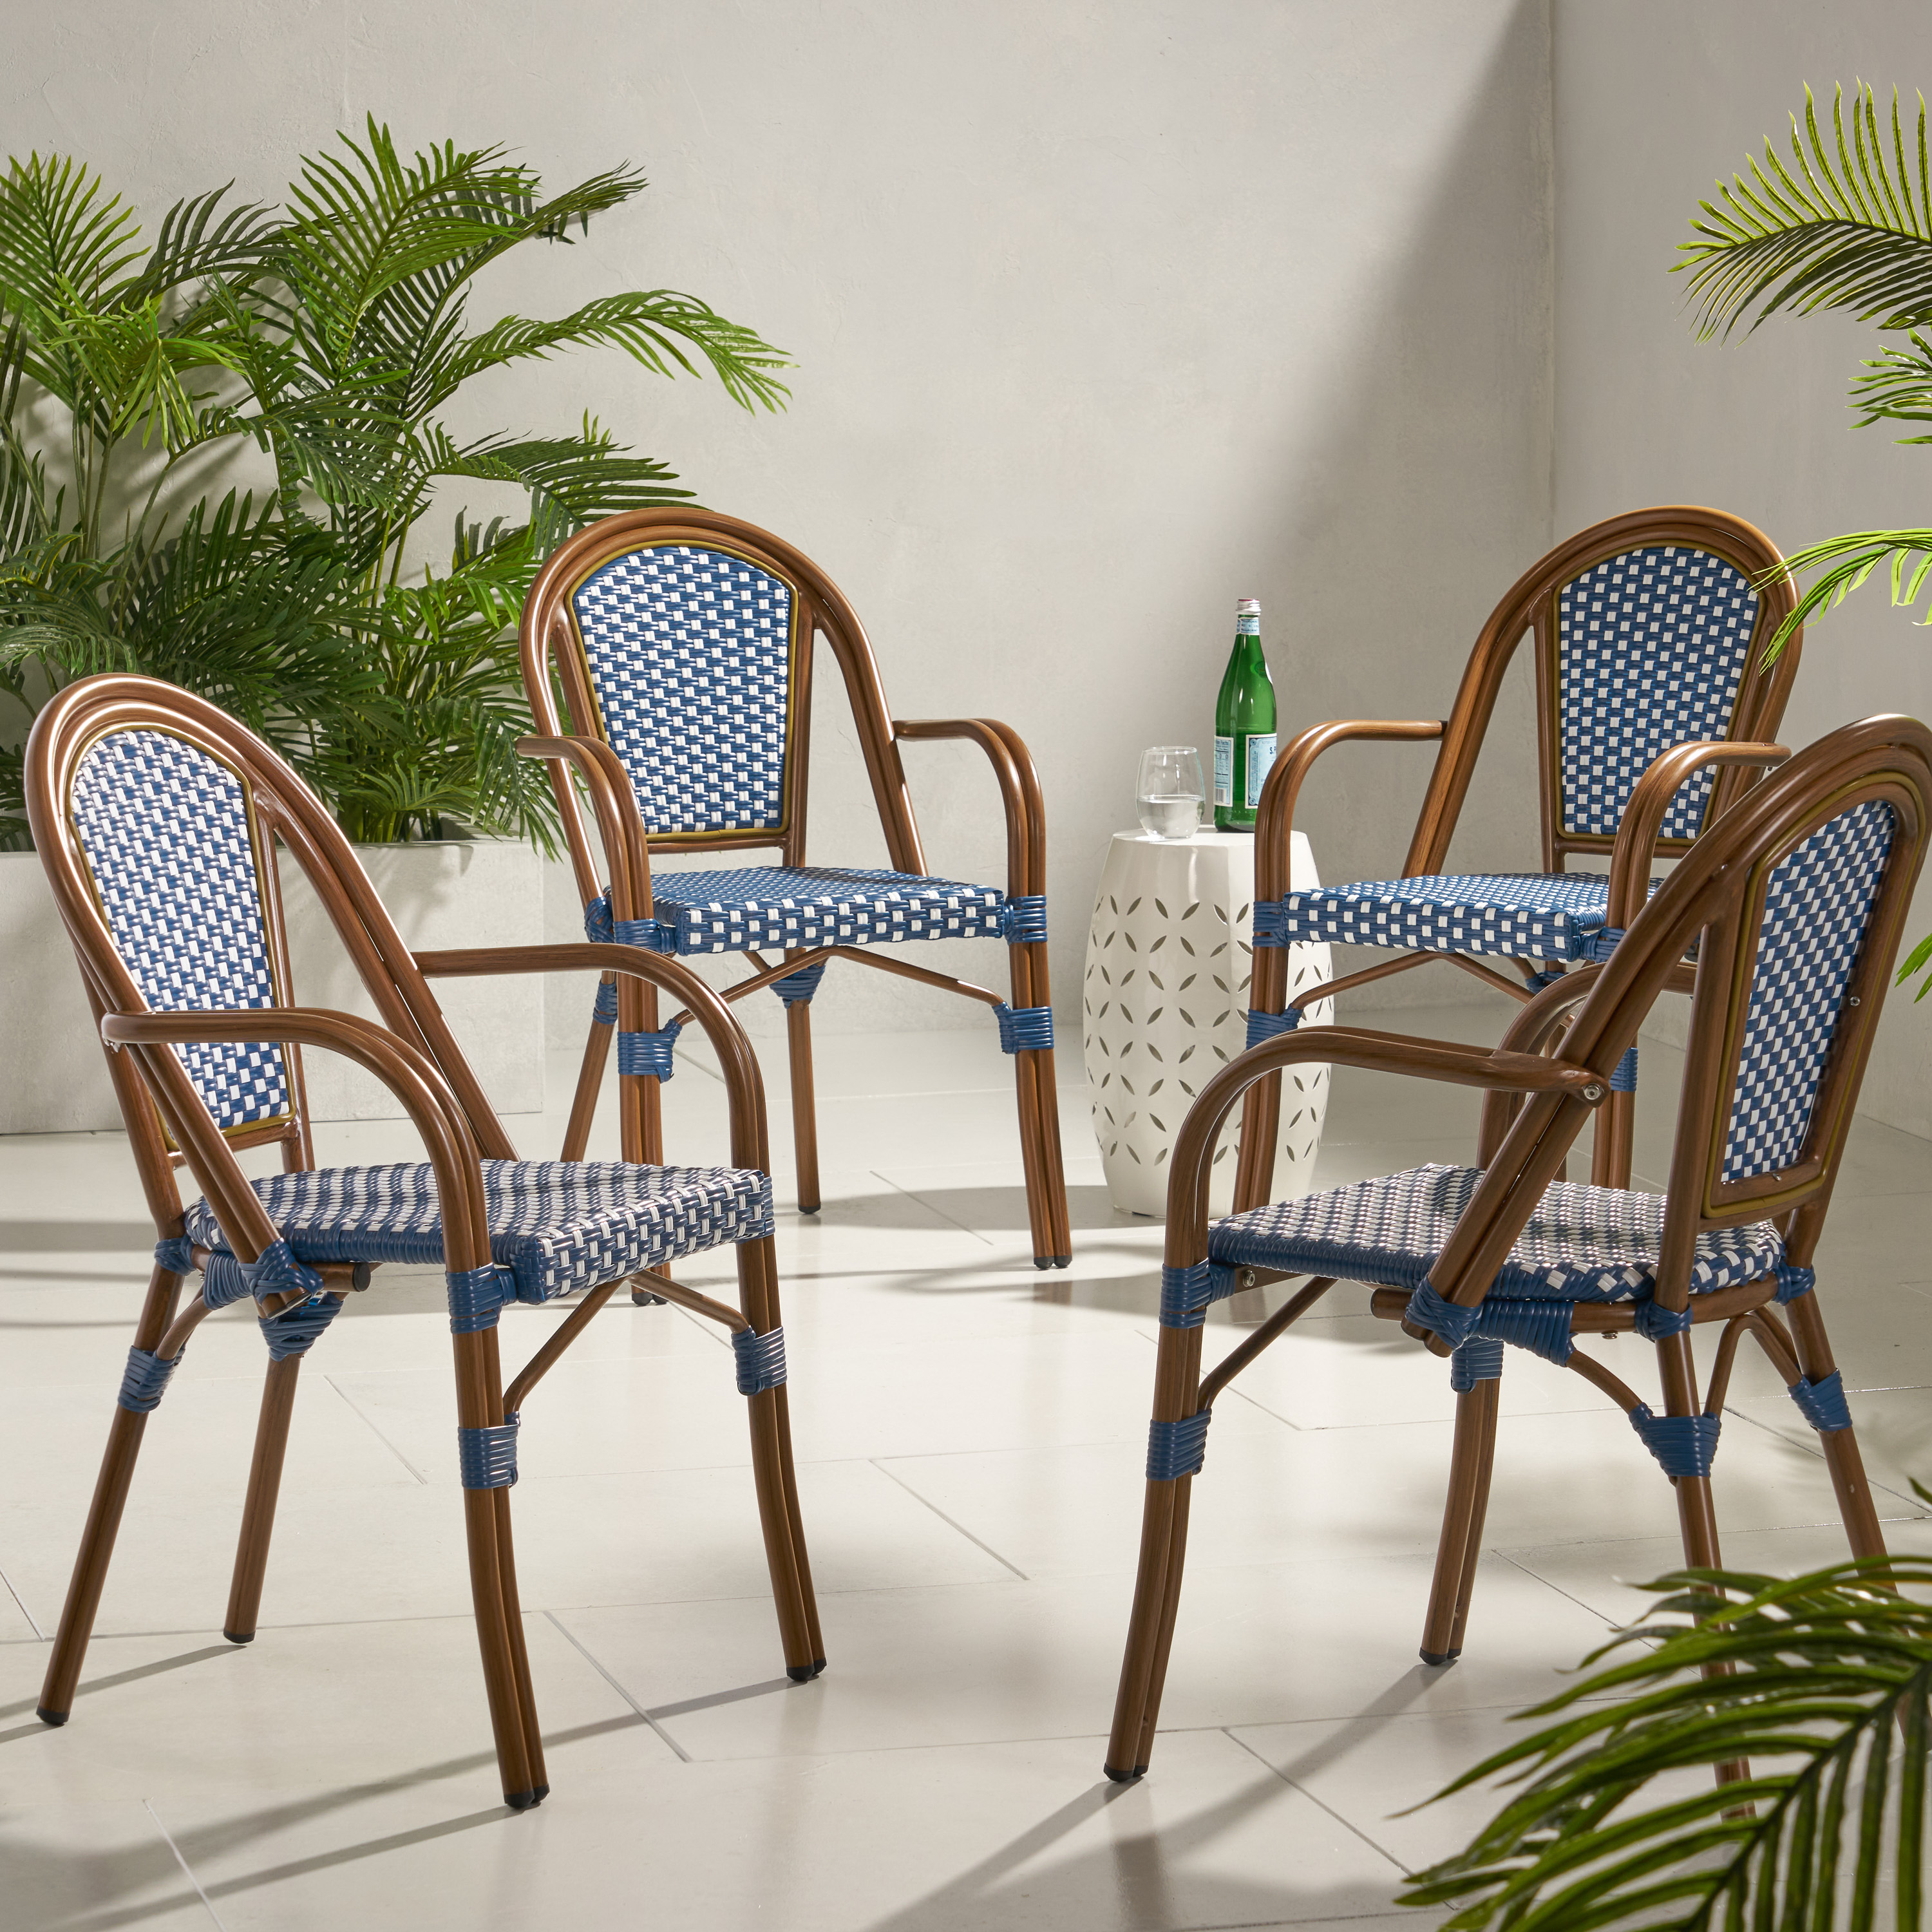 Cecil Aluminum and Wicker Outdoor French Bistro Chairs, Set of 4, Navy Blue, White, and Brown Wood - image 1 of 7